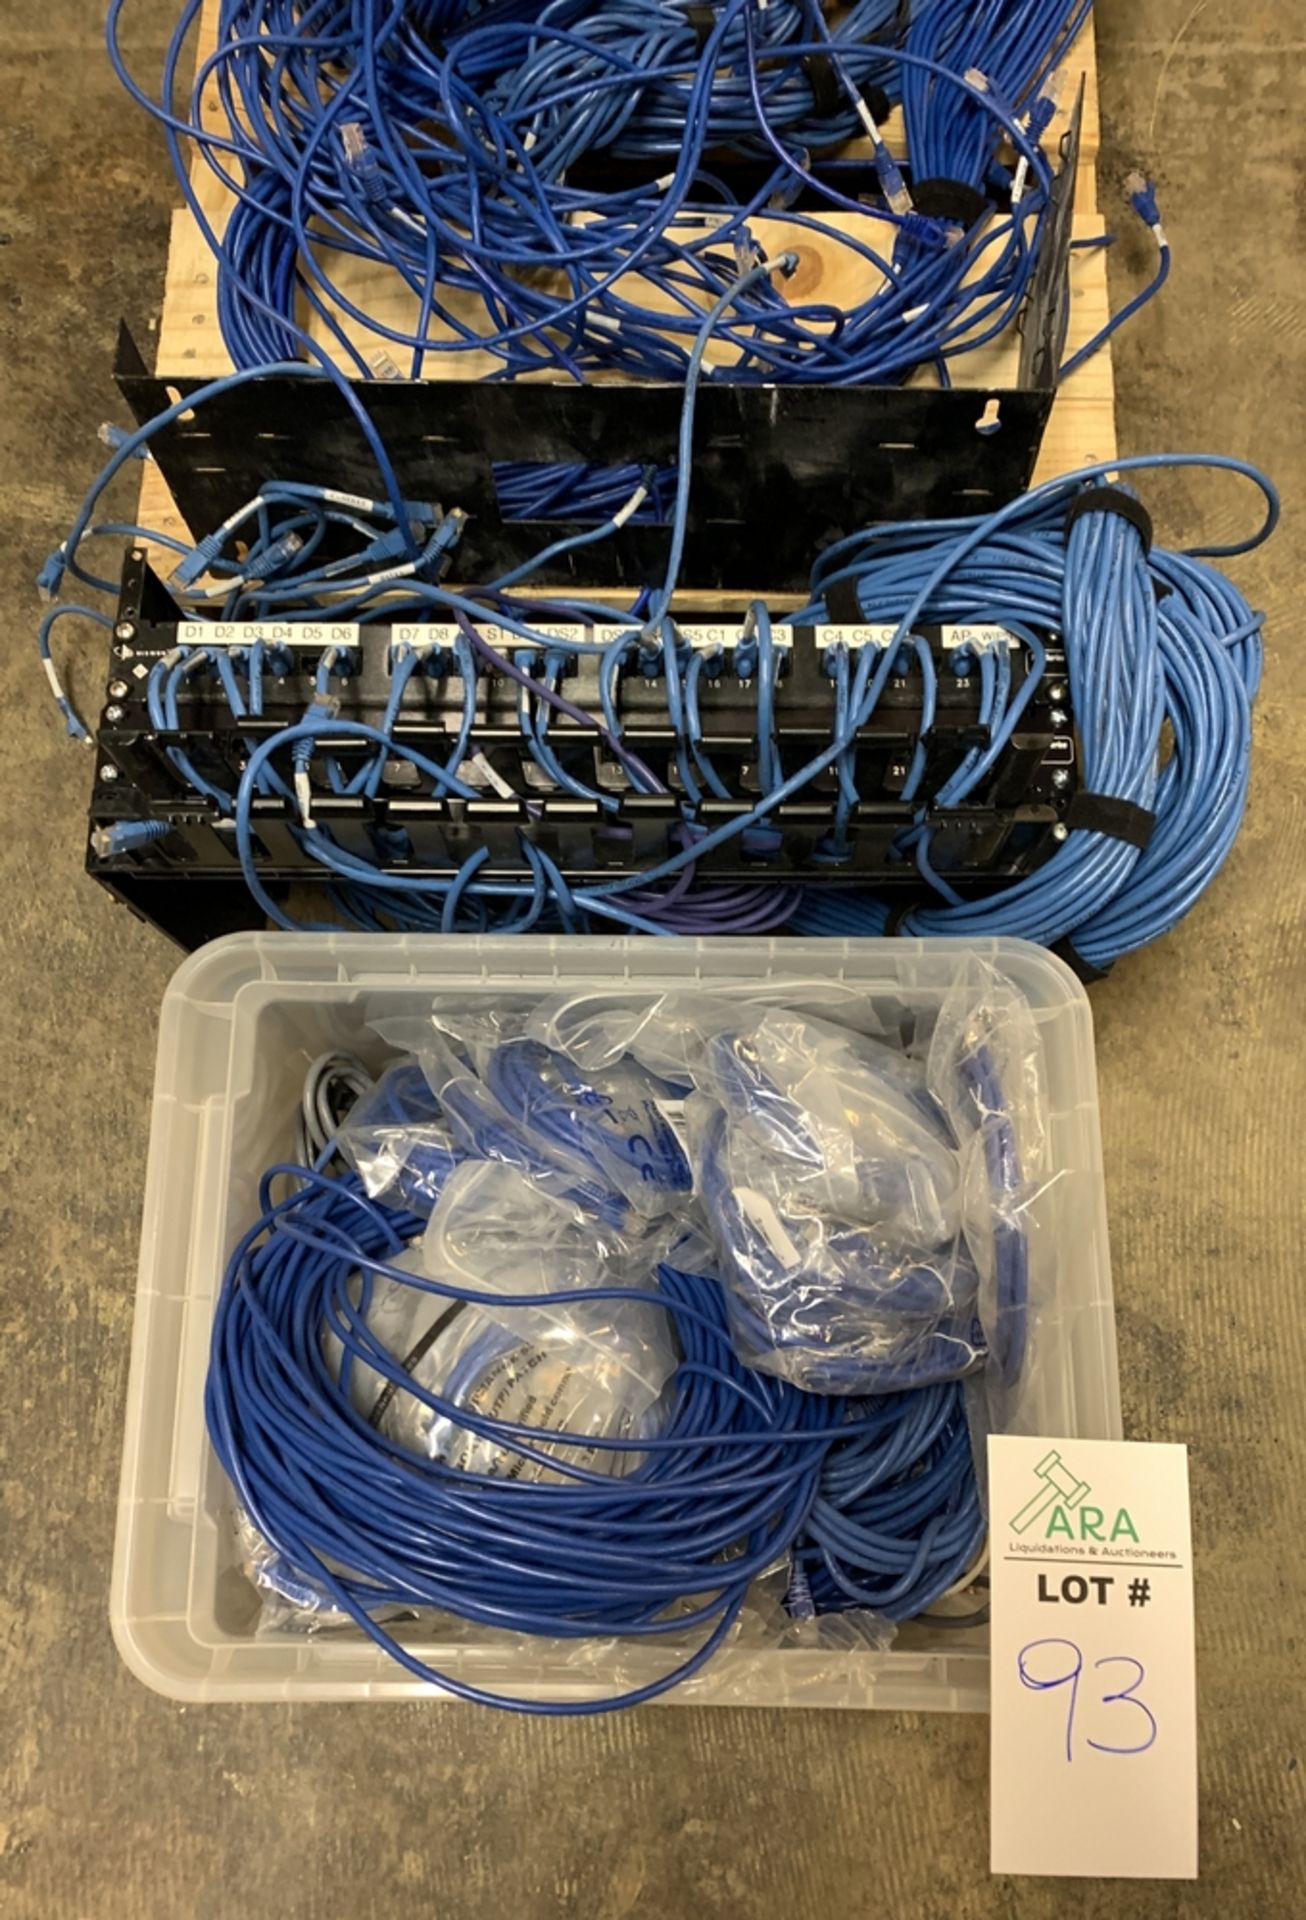 NETWORKING RACKING GEAR AND LOTS OF CABLE FOR GEAR - Image 2 of 4